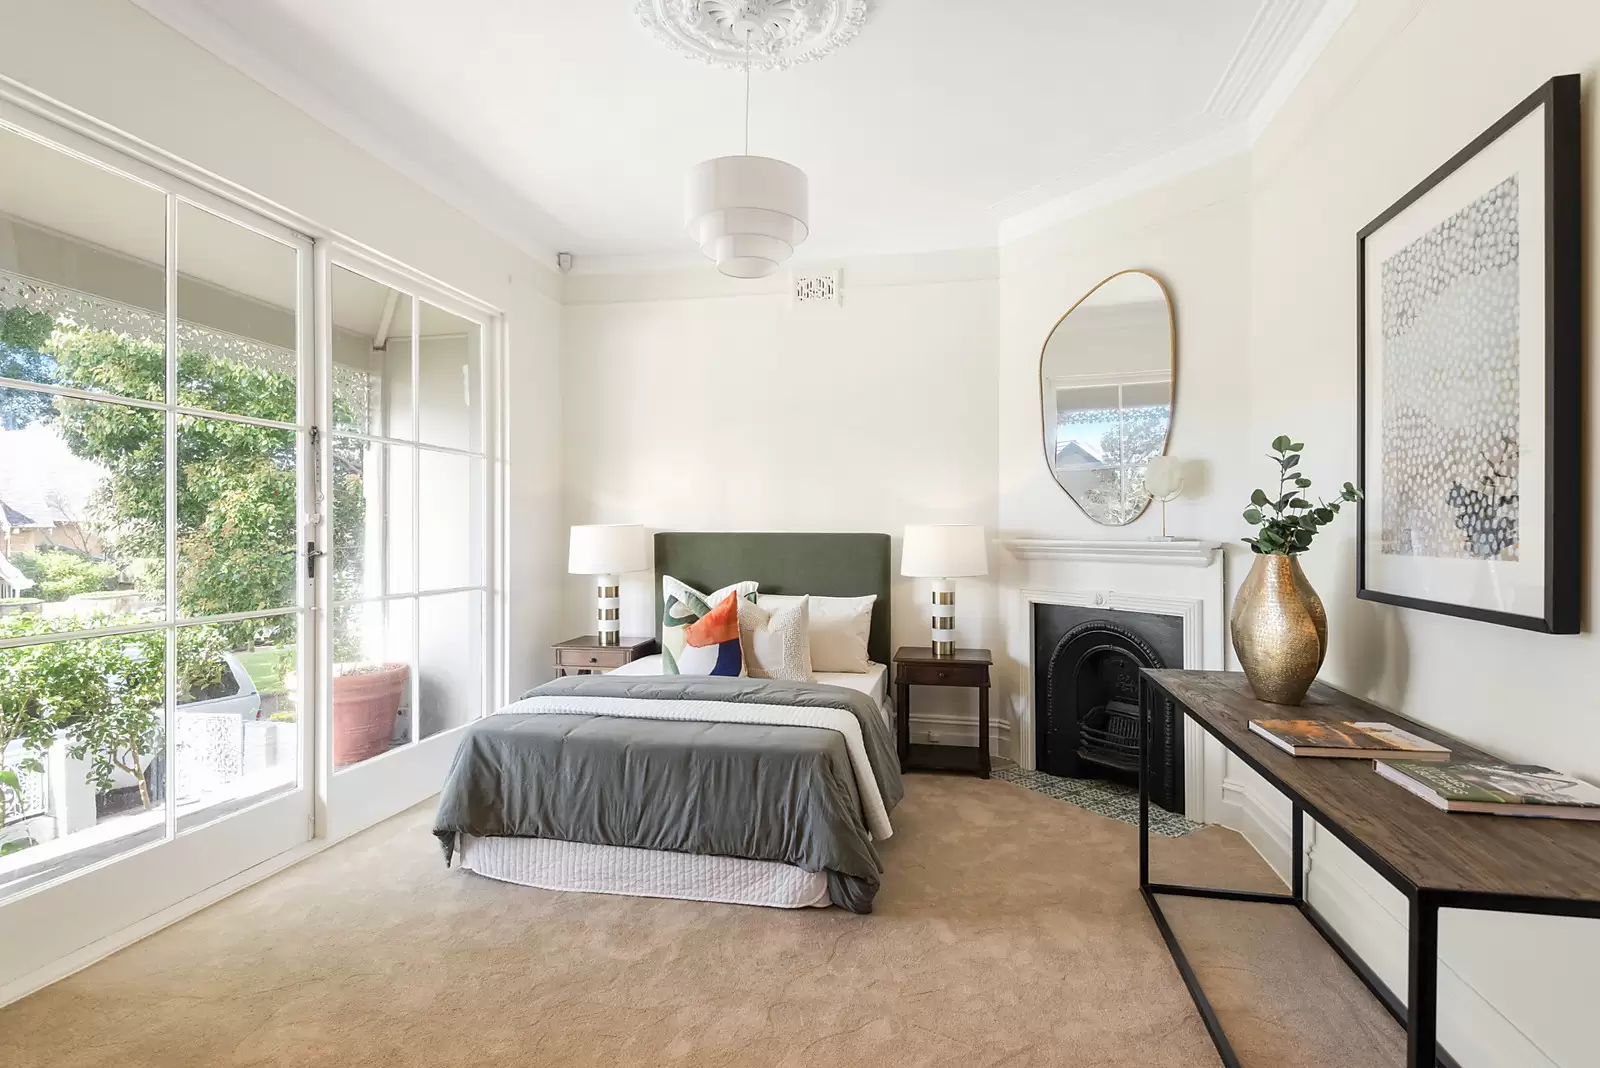 Photo #10: 15 Roslyndale Avenue, Woollahra - Sold by Sydney Sotheby's International Realty